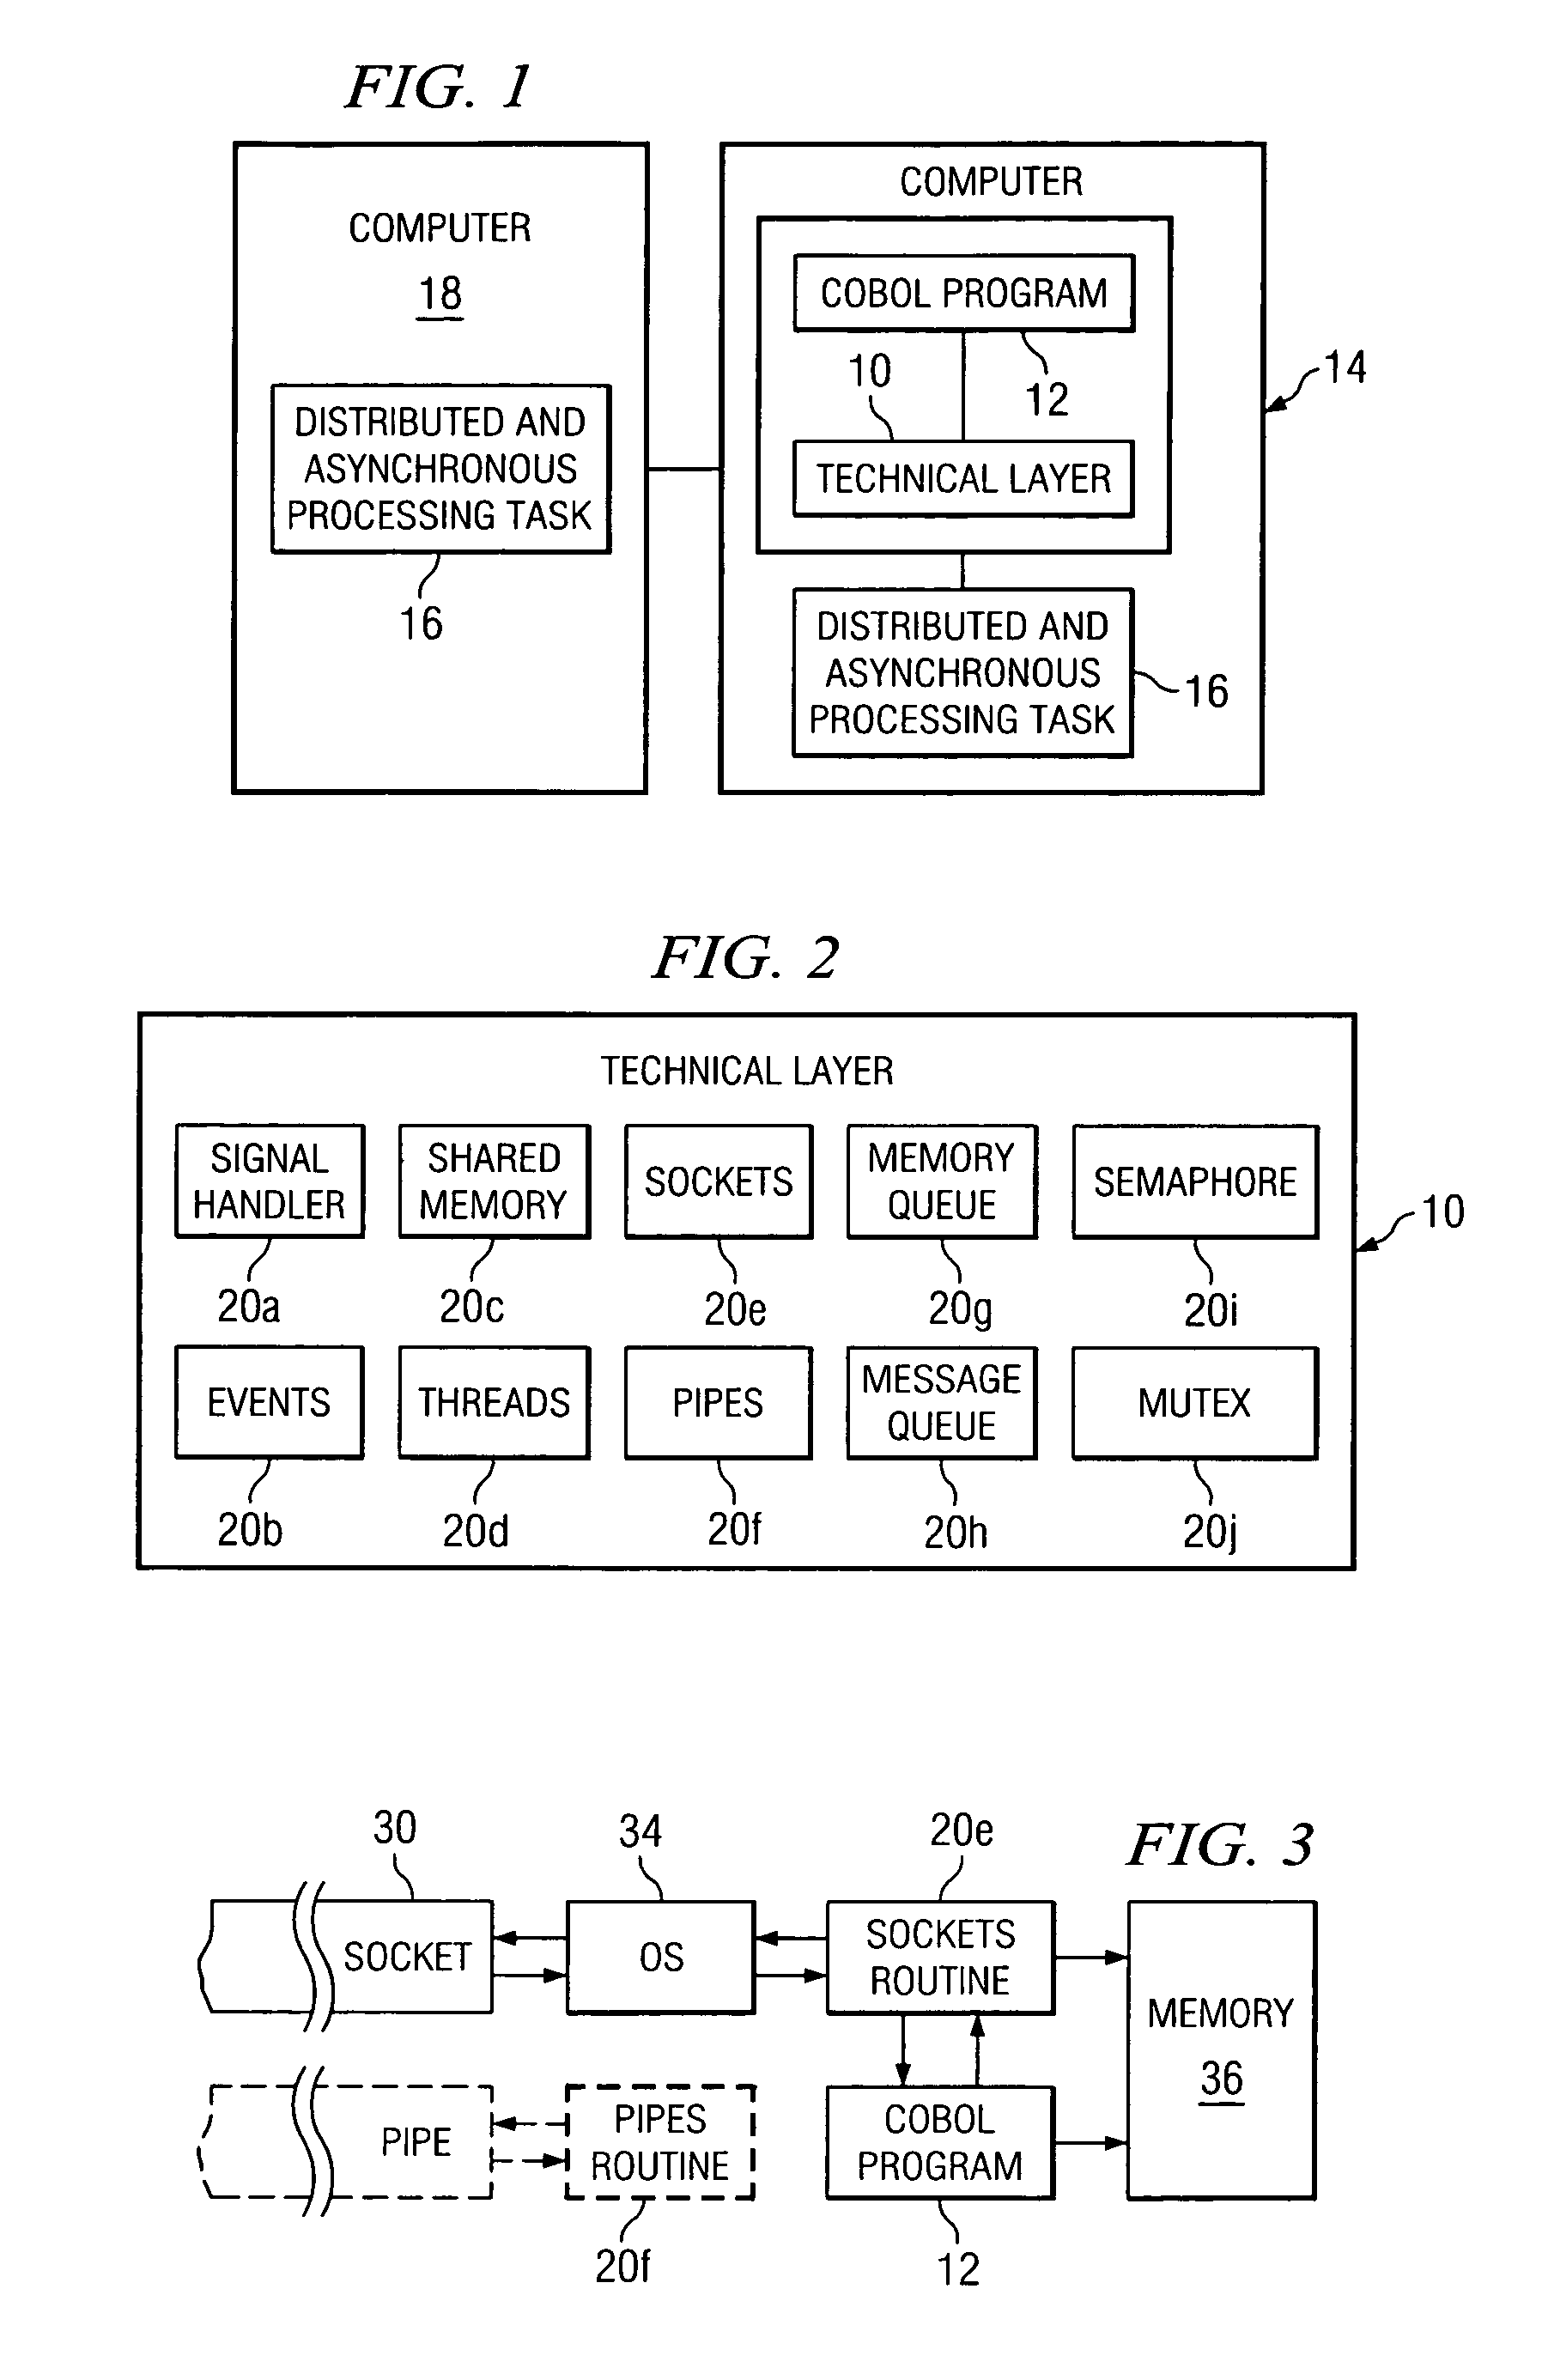 System and method for COBOL to provide shared memory and memory and message queues